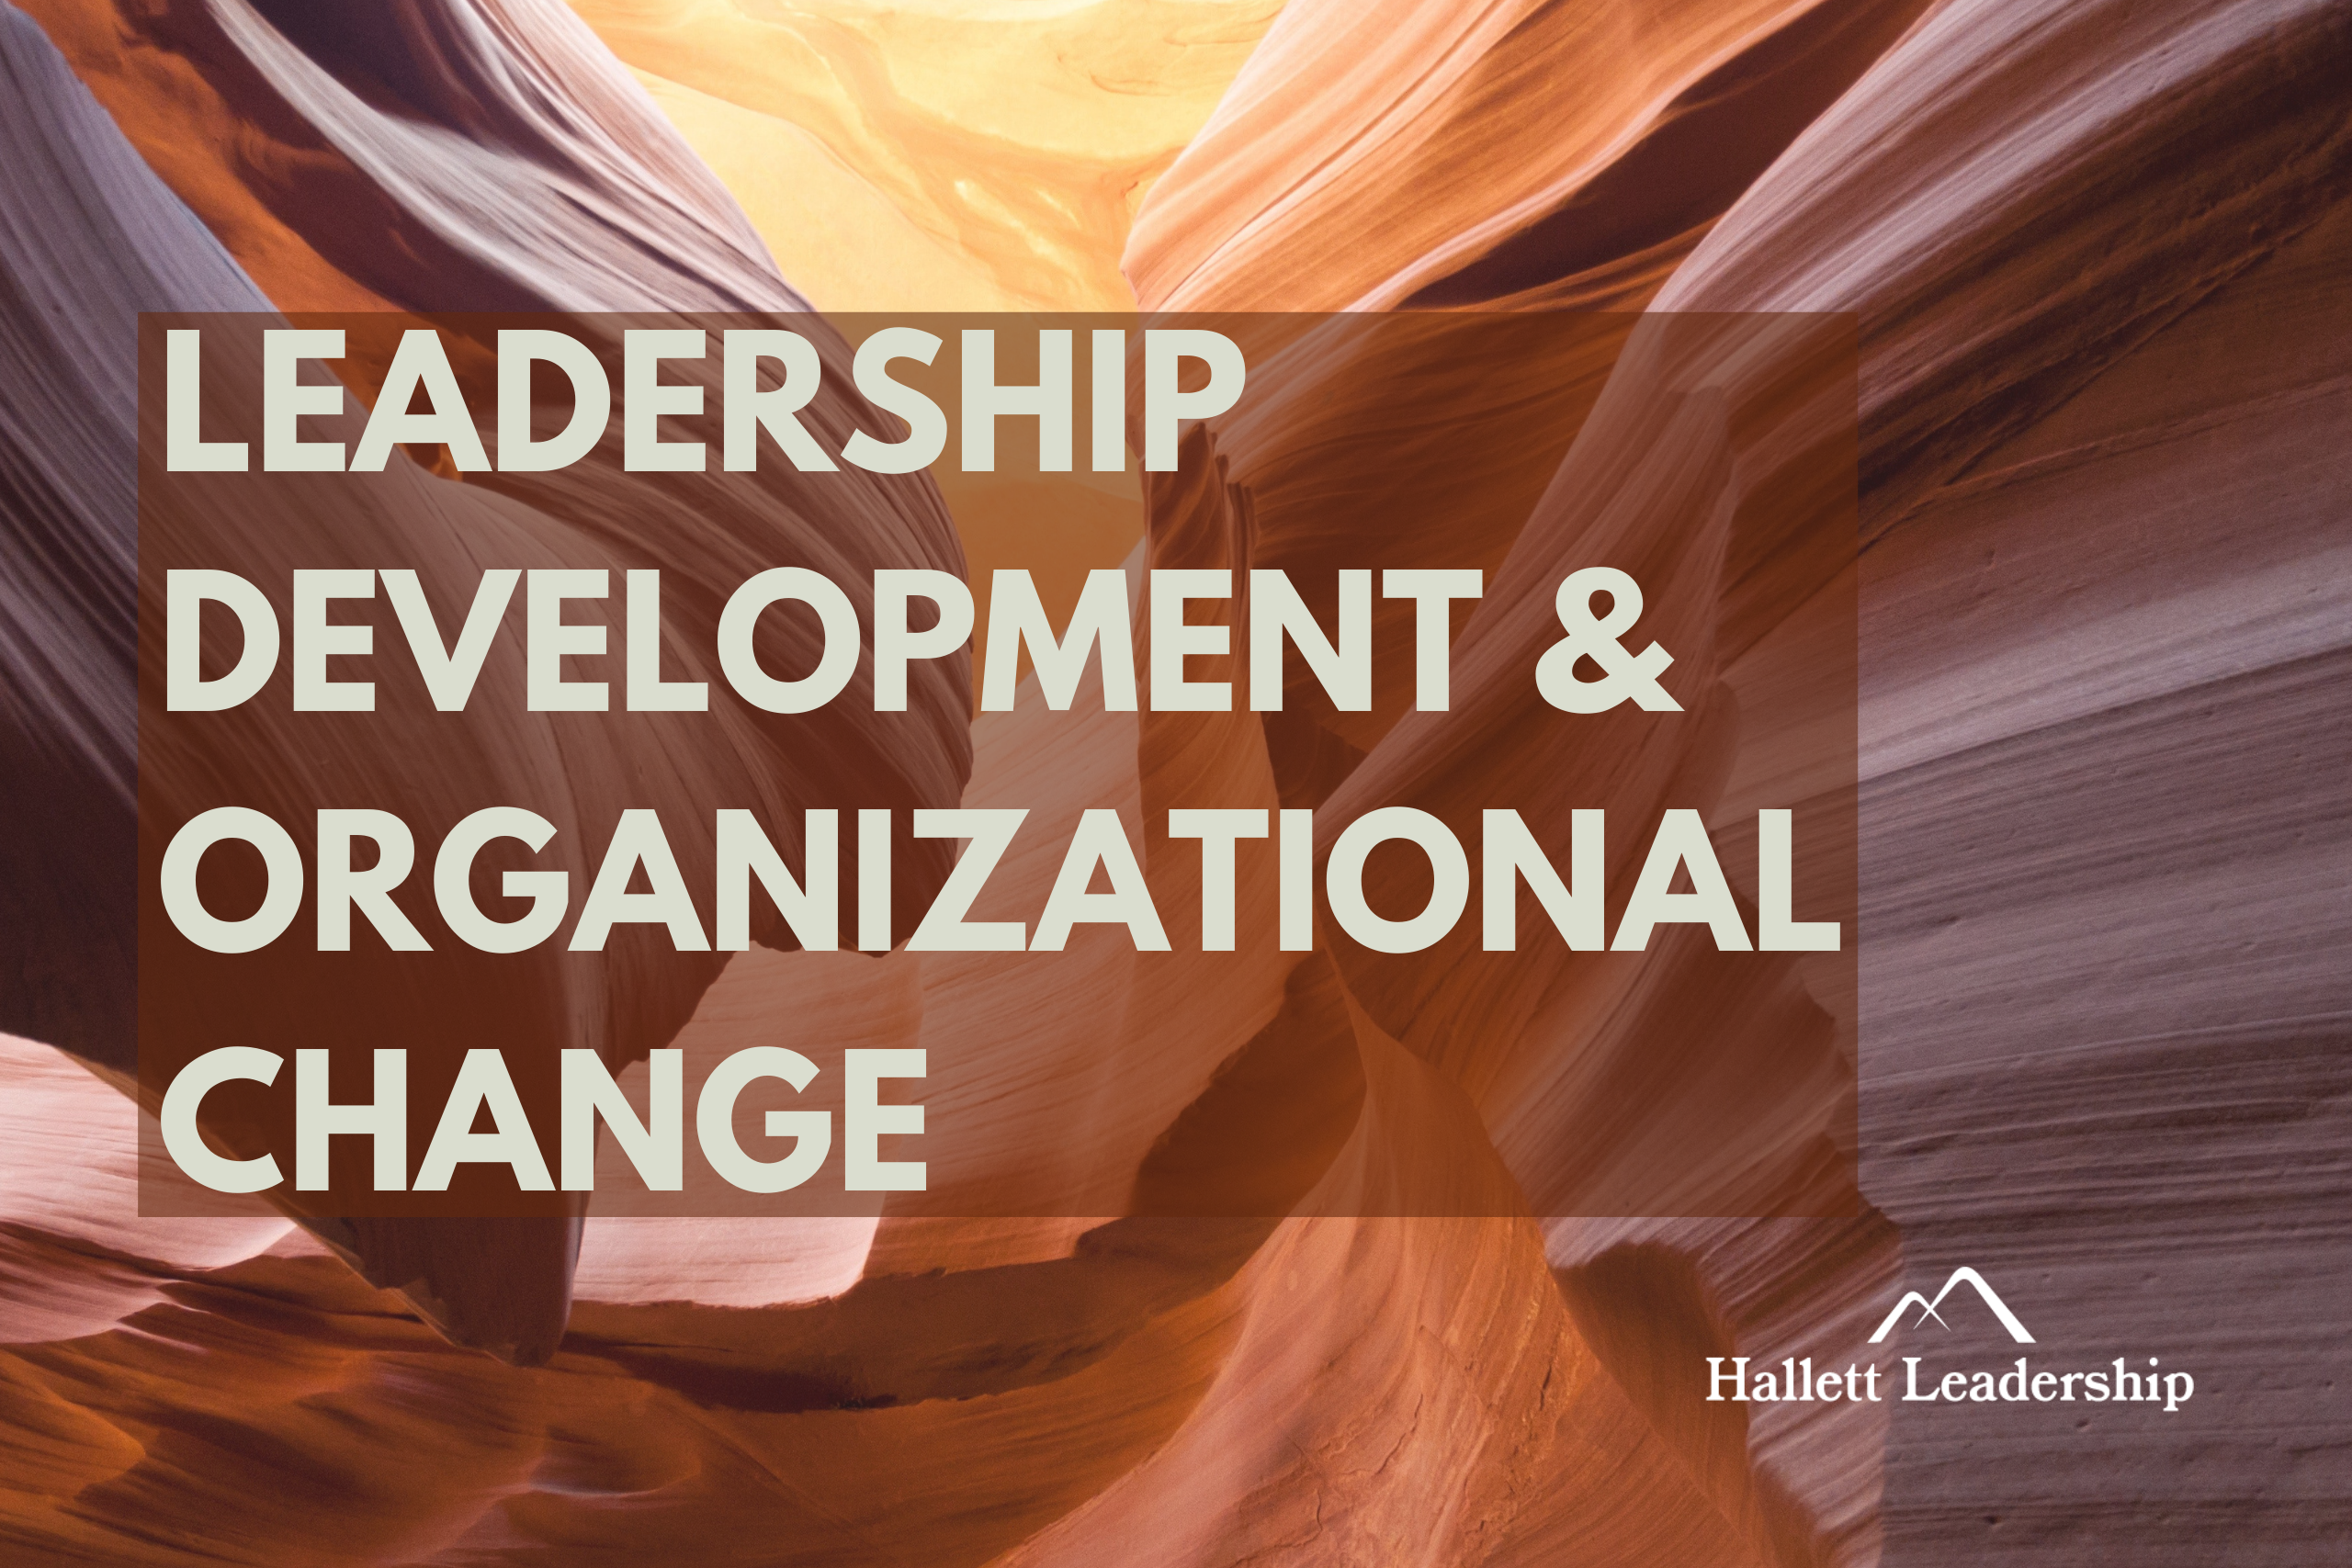 Middle Management Development and Change